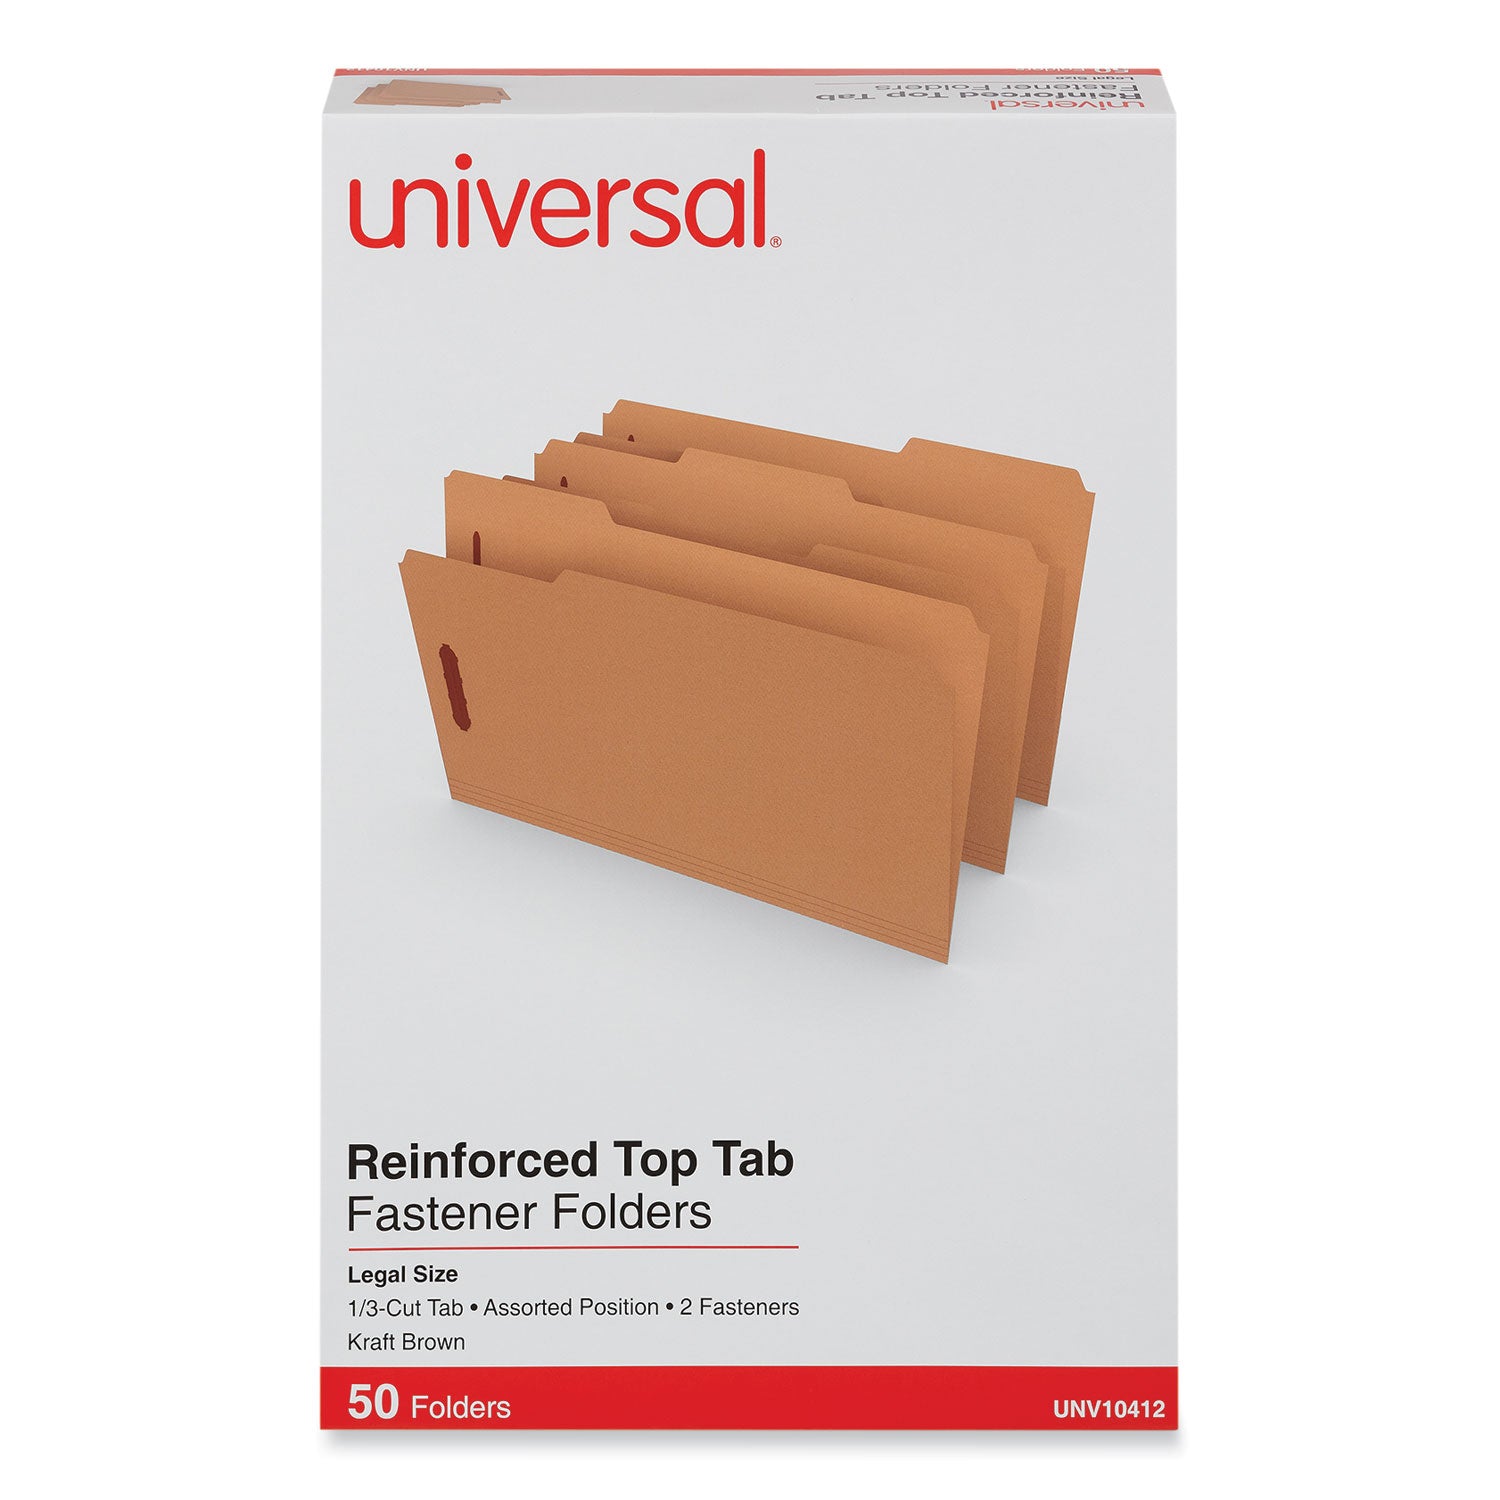 reinforced-top-tab-fastener-folders-075-expansion-2-fasteners-legal-size-brown-kraft-exterior-50-box_unv10412 - 2